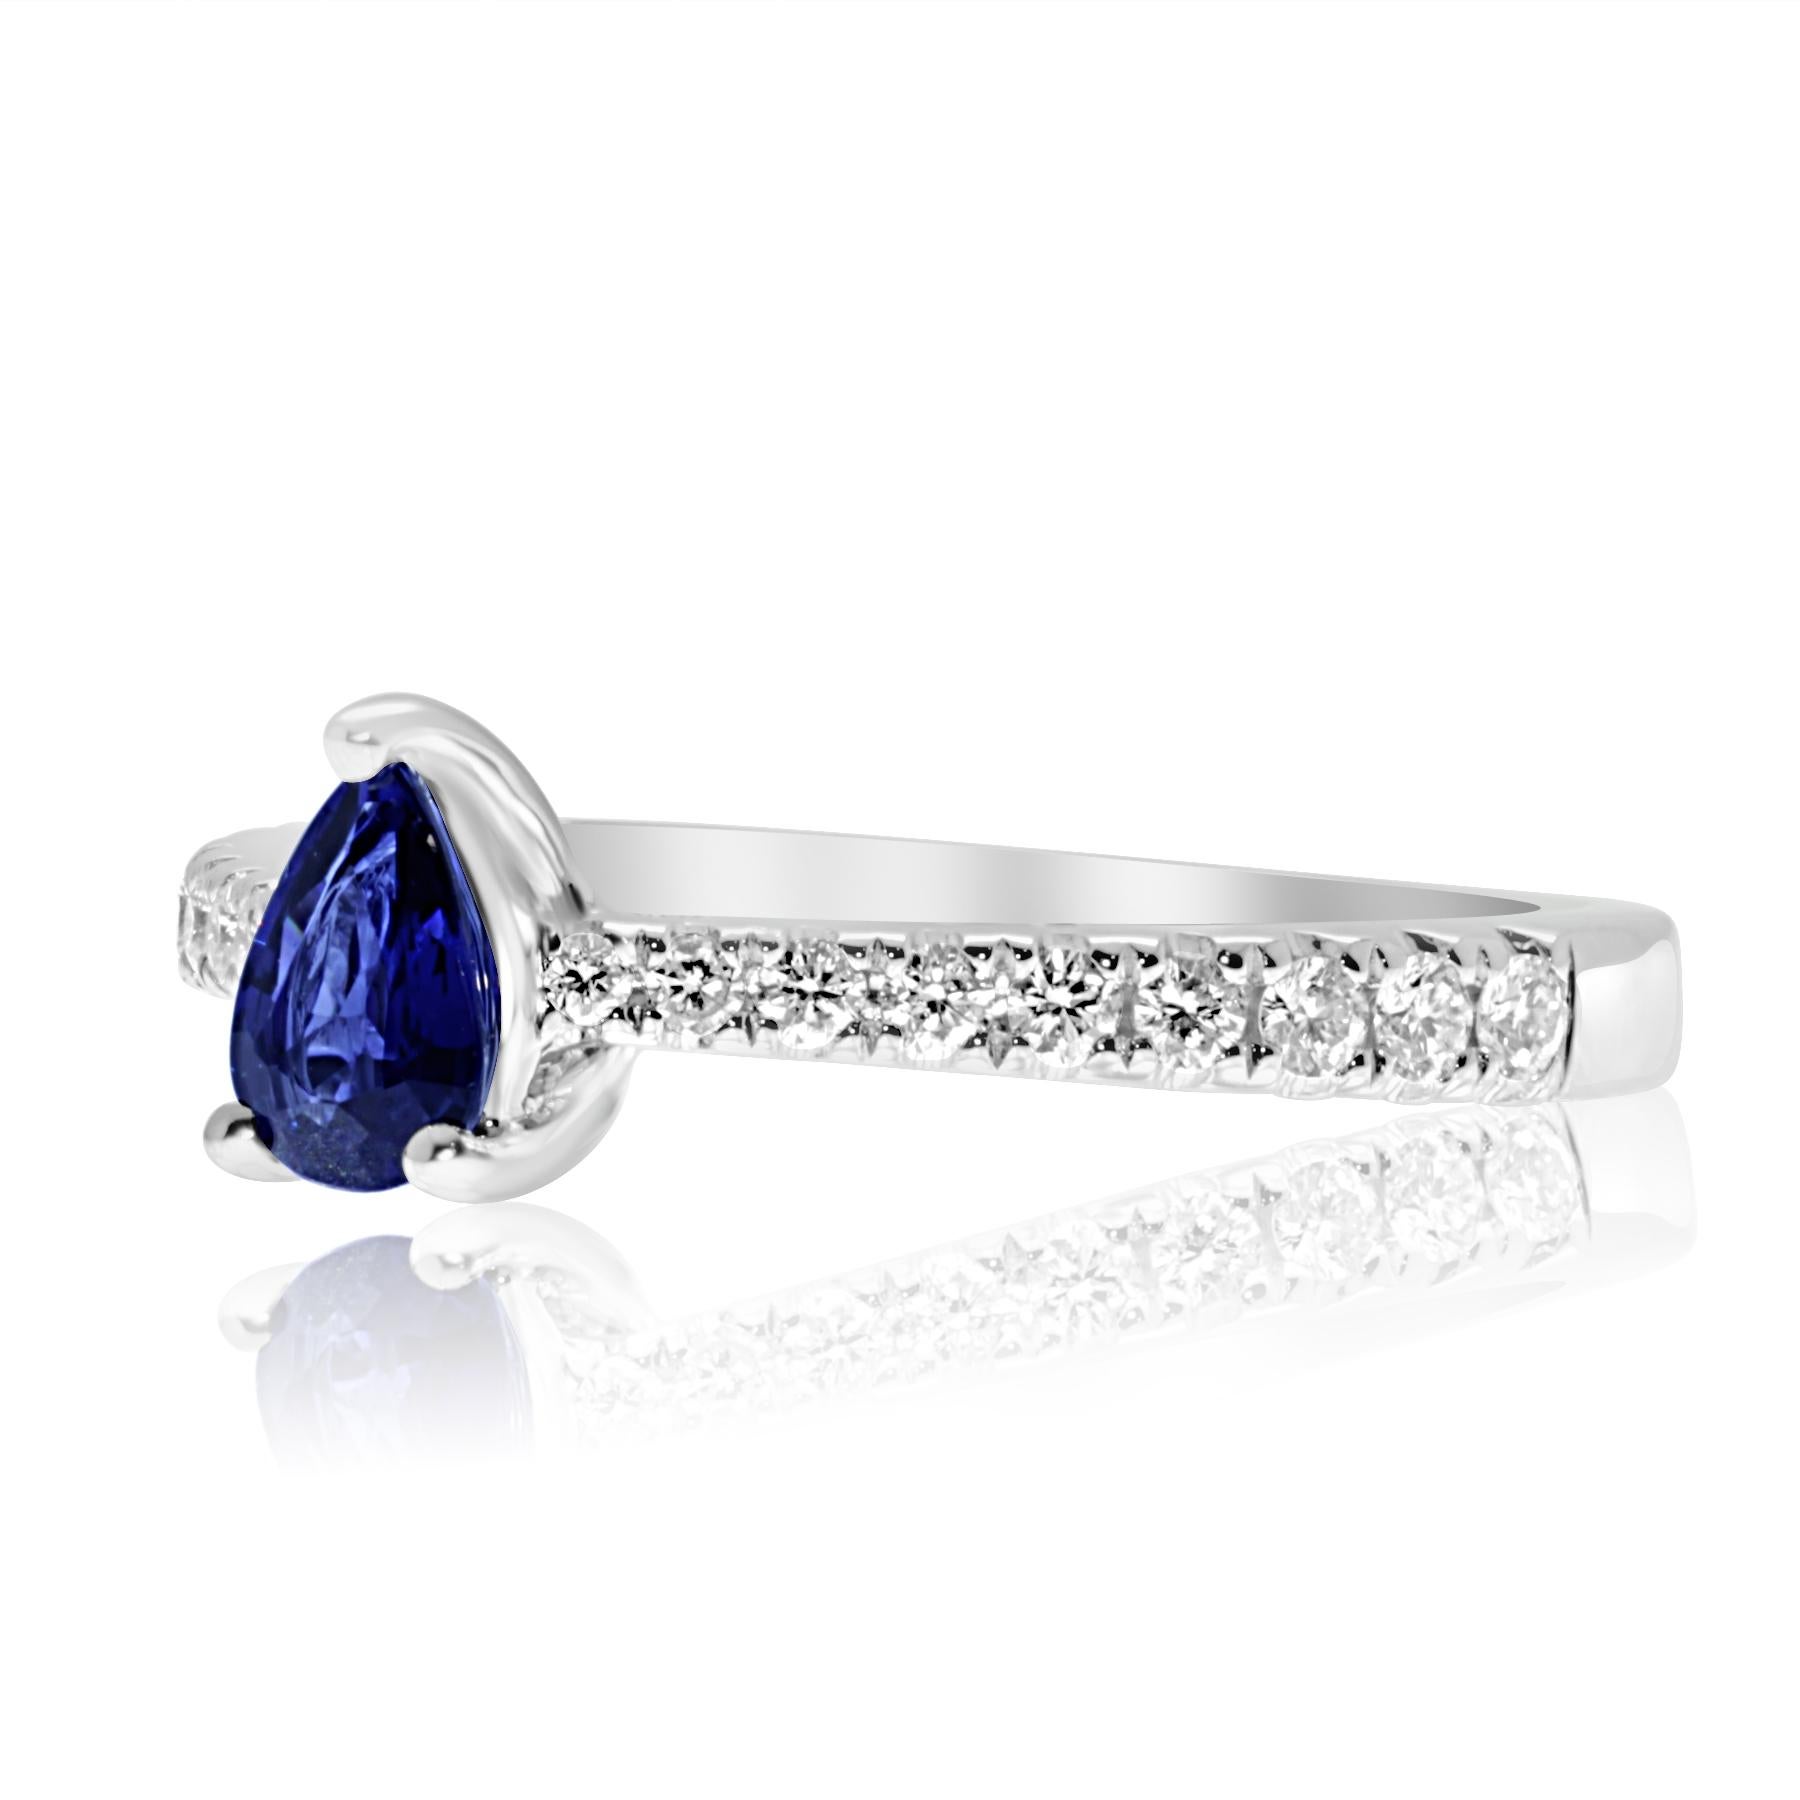 cute and elegant engagement ring, fine and discrete. 
a gorgeous way to tie the knot and stay in budget.
featuring a gorgeous pear shaped blue sapphire of 0.39ct.
sides are set with (18) brilliant cut diamonds weighing a total of 0.26ct.
ring size